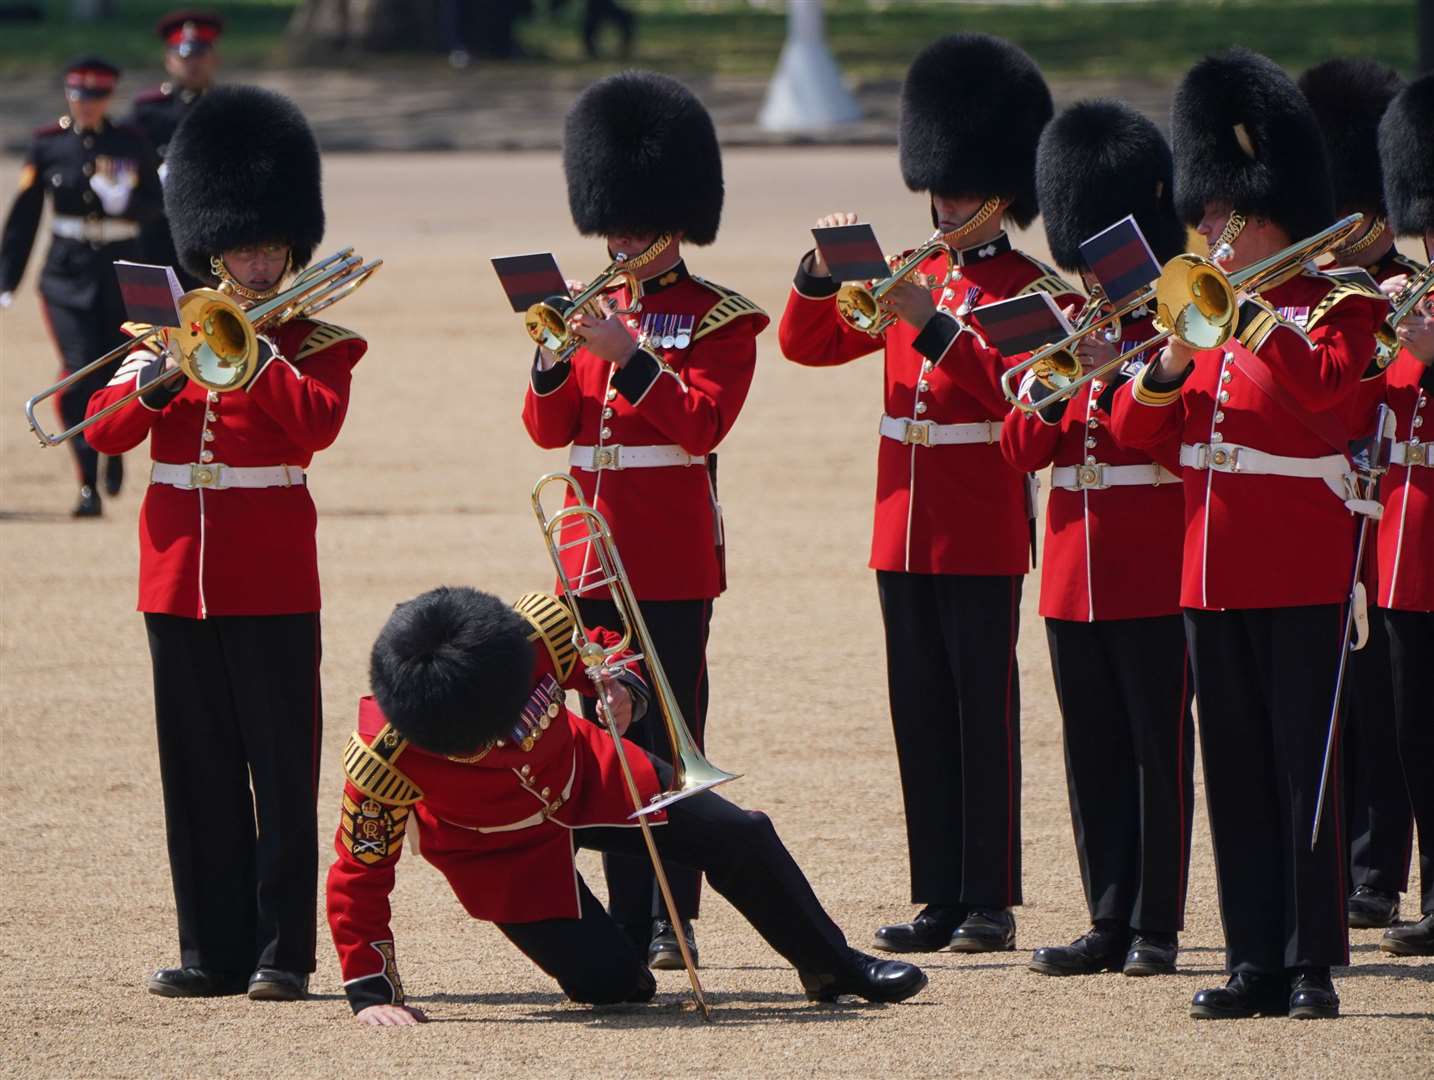 A trombone player in the military band falls to his knees (Jonathan Brady/PA)